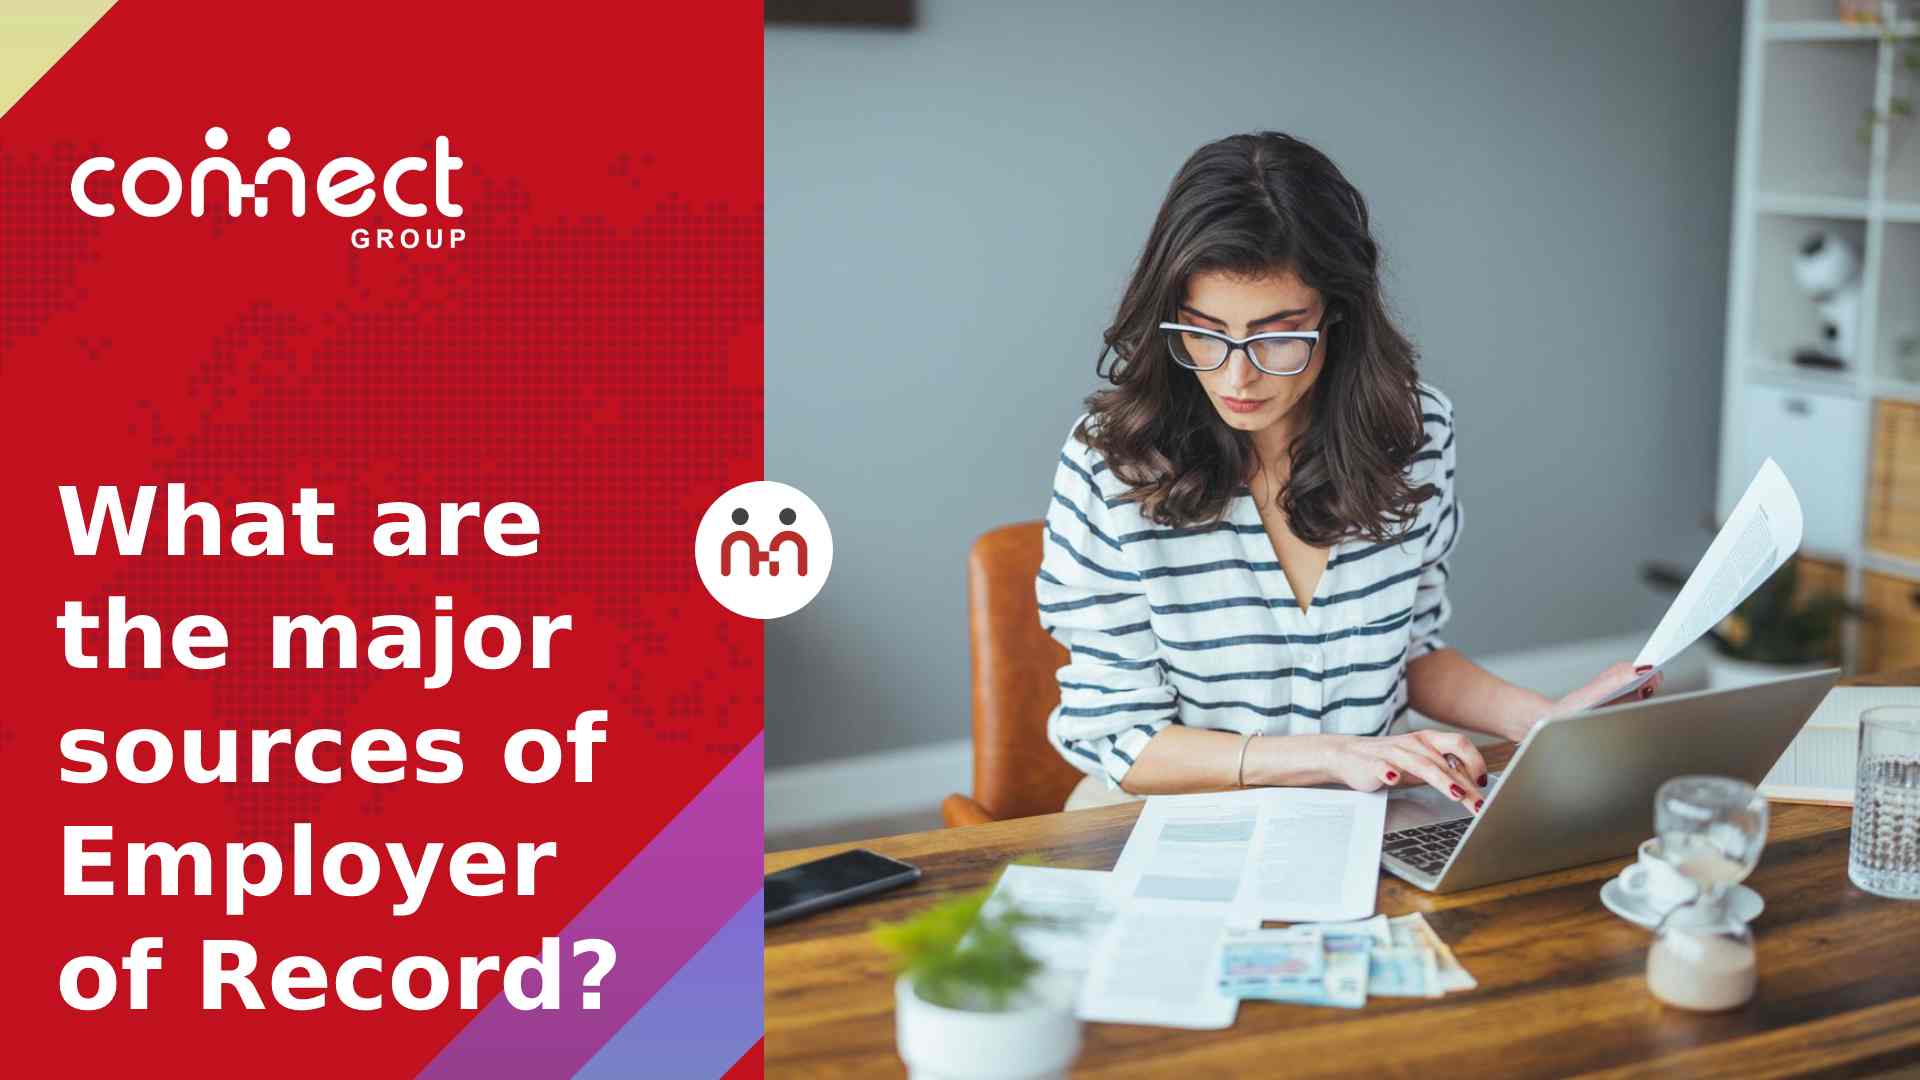 What are the major sources of Employer of Record?